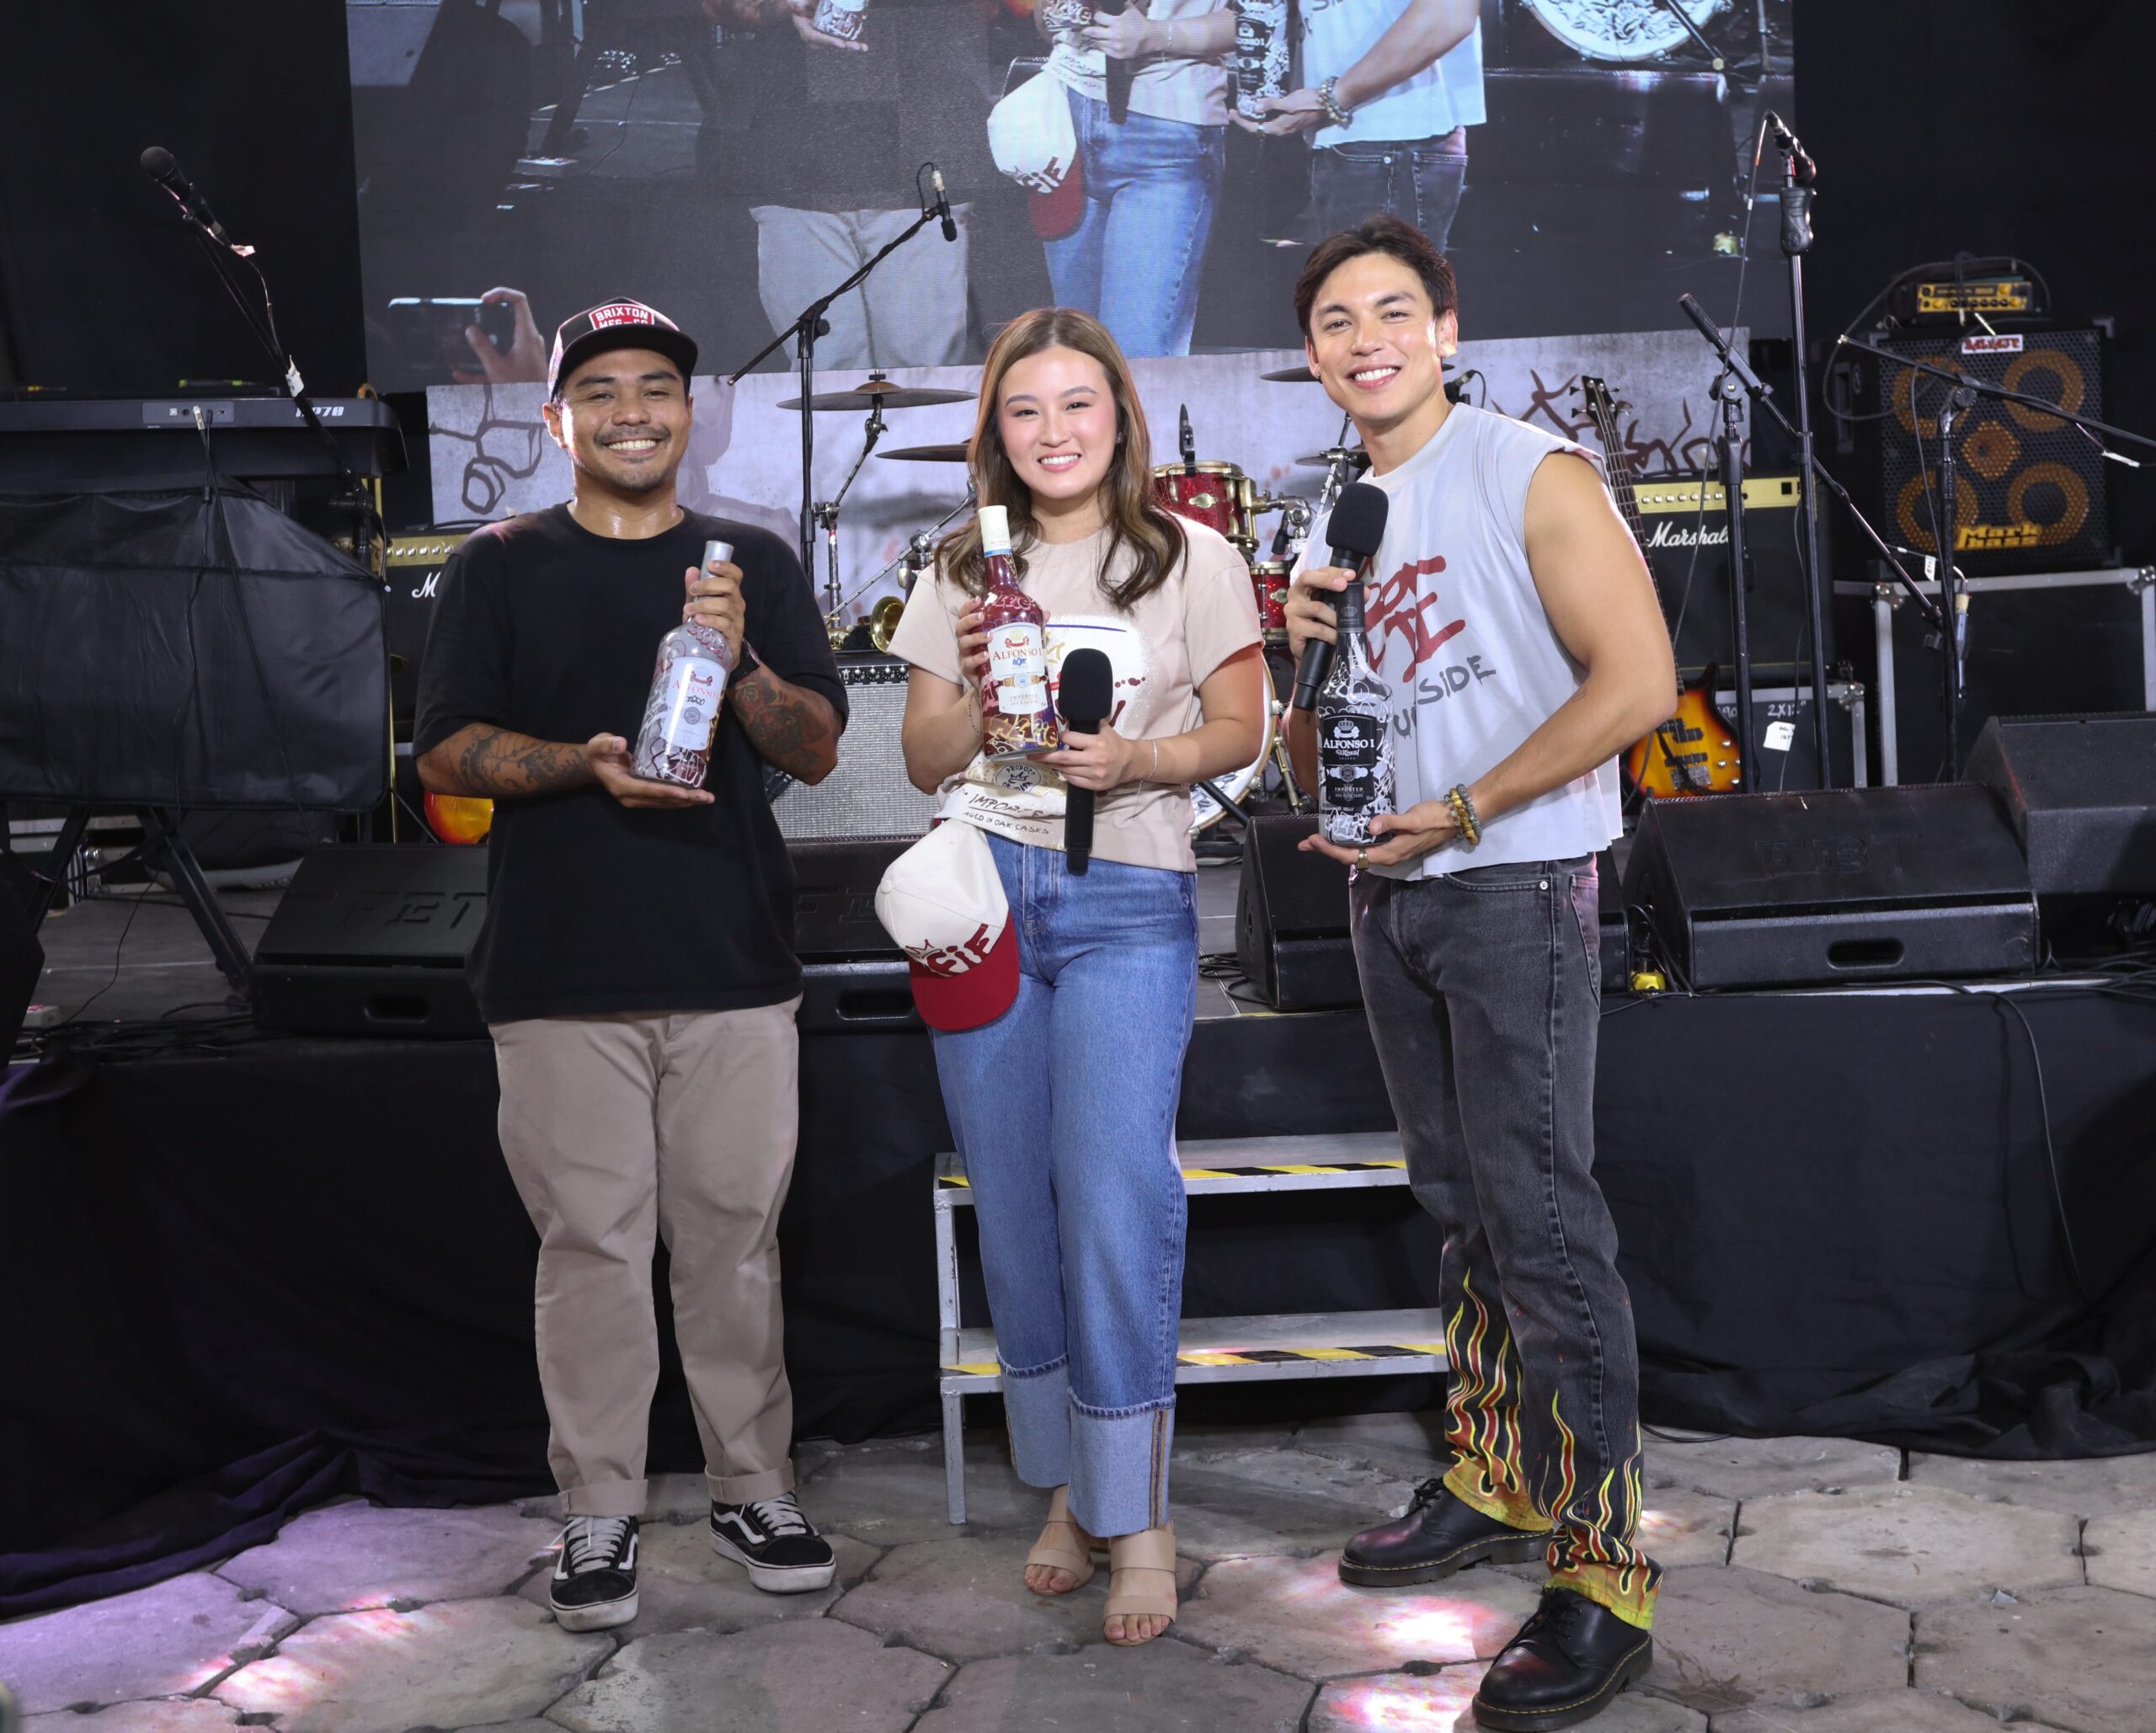 Sales and Marketing Director of Montosco Inc. Ms. Lauren Tanganco together with Alfie Alley host Alex Diaz and street artist Mr. Dennis Bato scaled